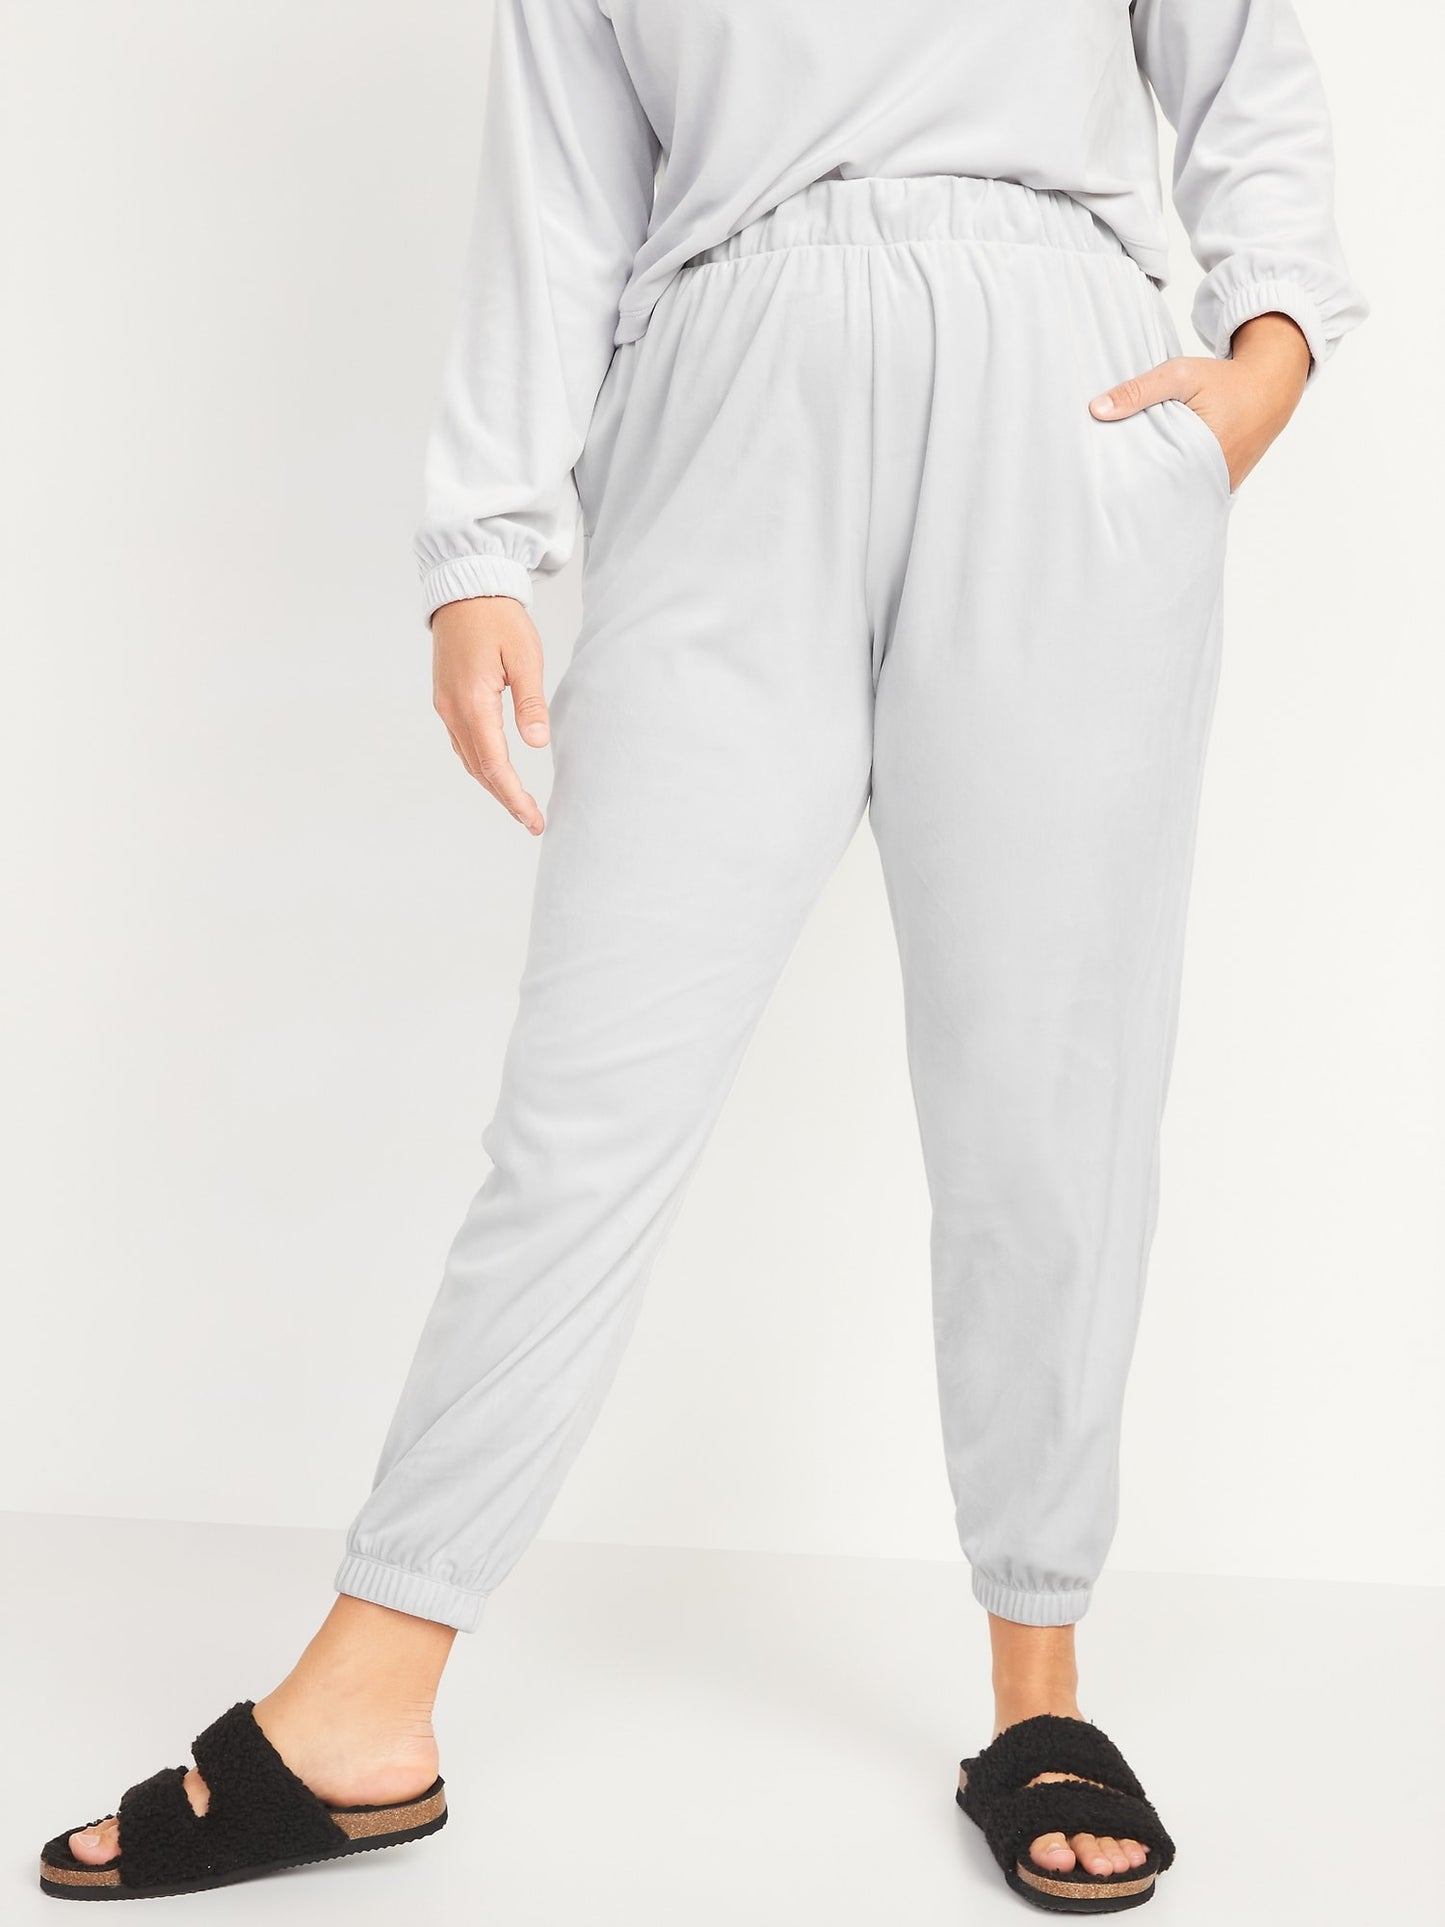 ON High-Waisted Luxe Velvet Jogger Sweatpants For Women Cloud Cover